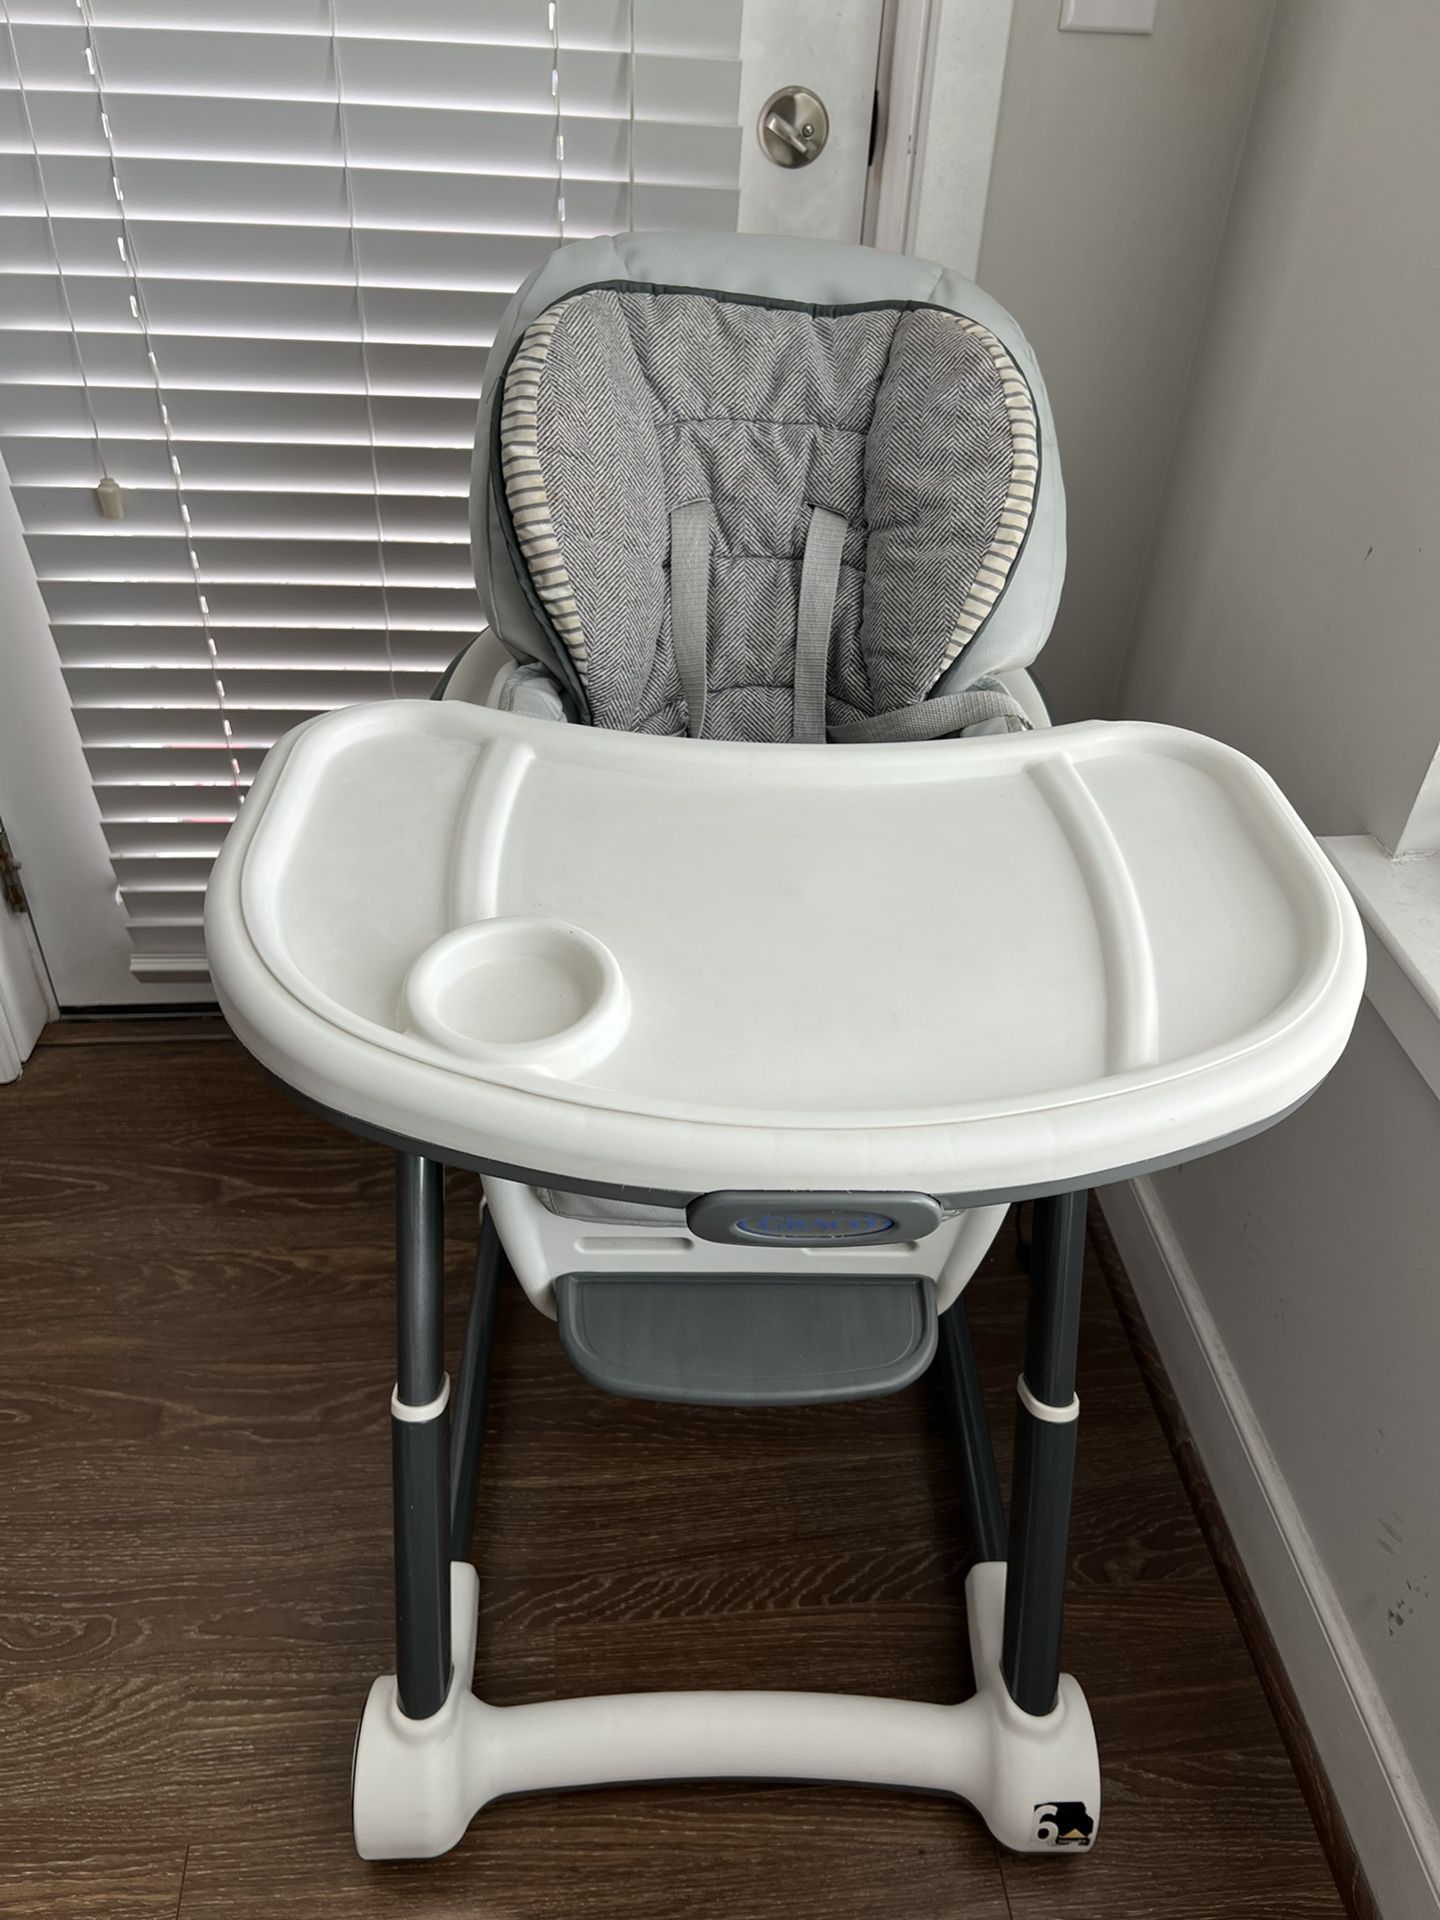 GRACO 6 in 1 Convertible High Chair 